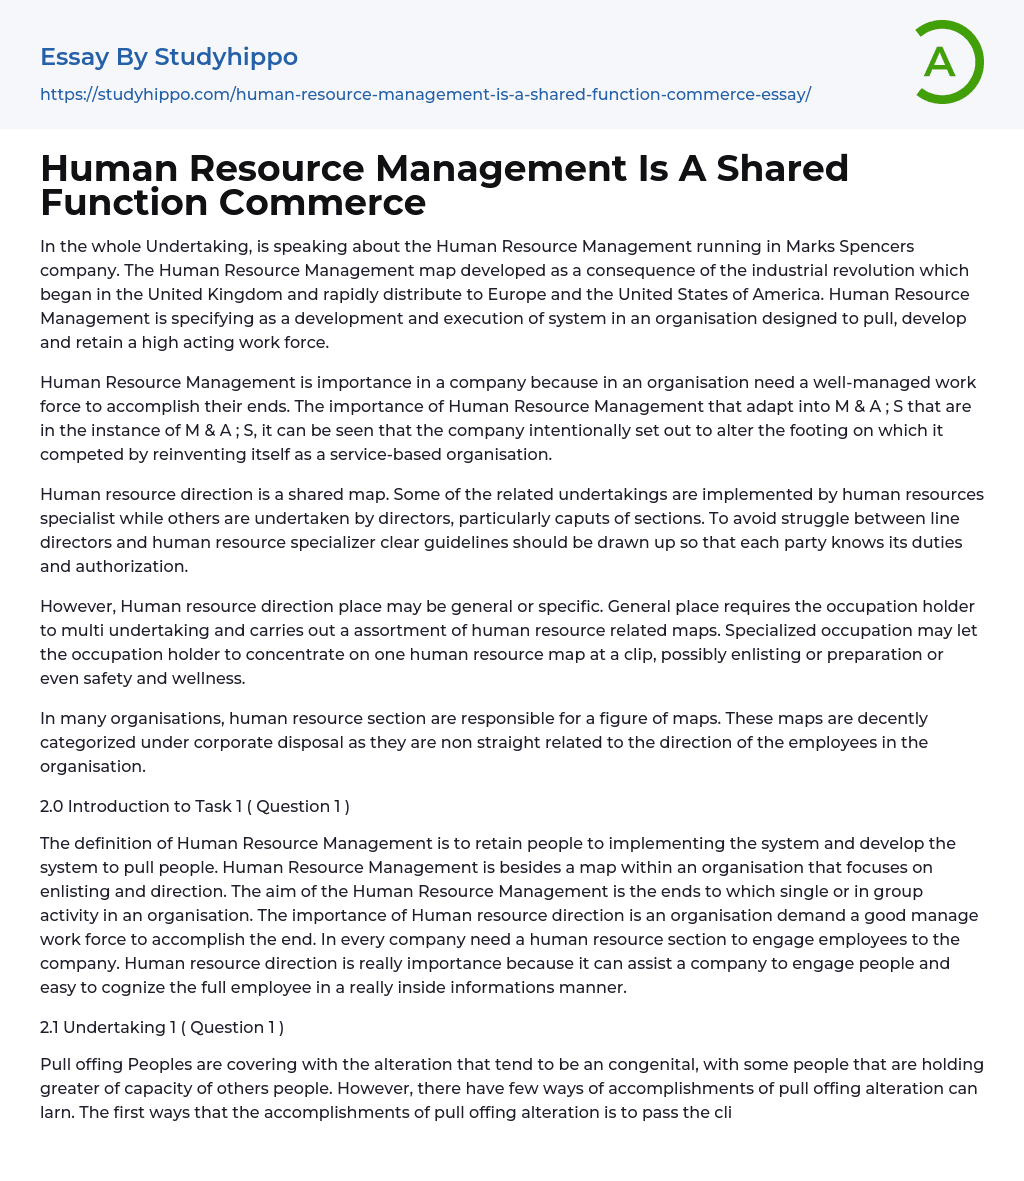 Human Resource Management Is A Shared Function Commerce Essay Example